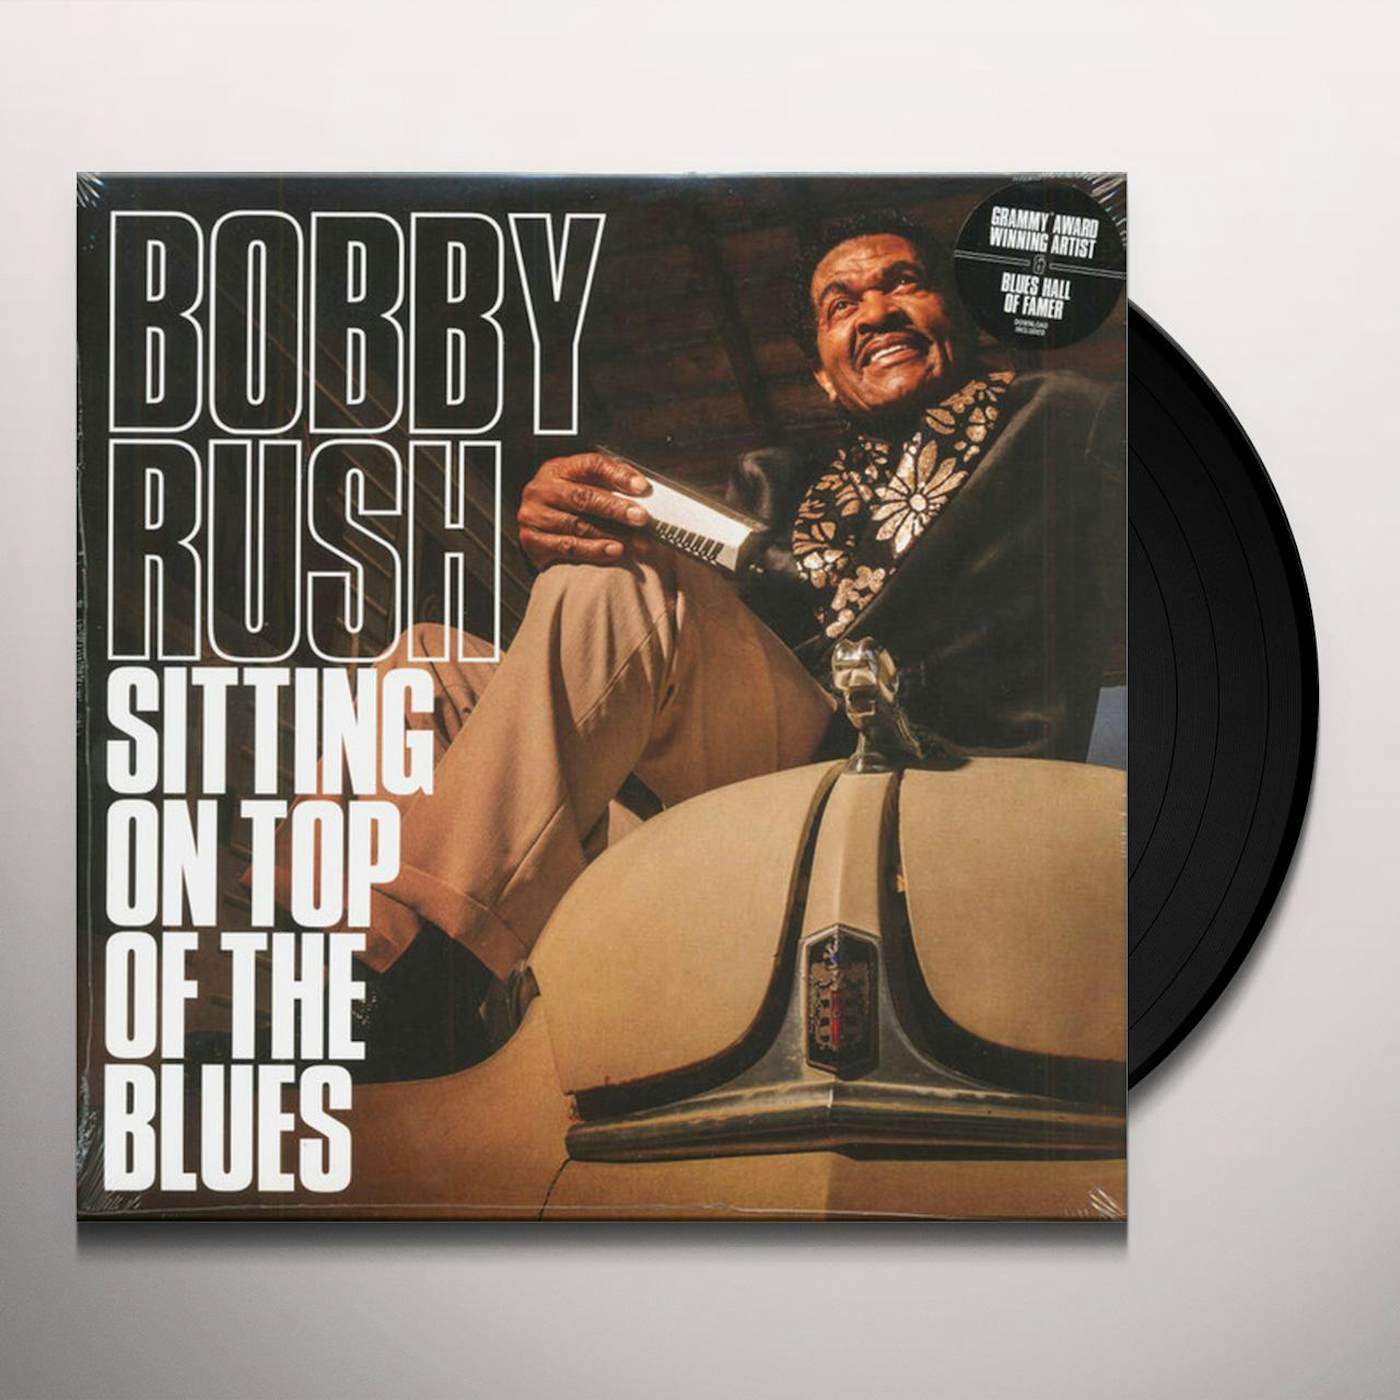 Bobby Rush Sitting on Top of the Blues Vinyl Record